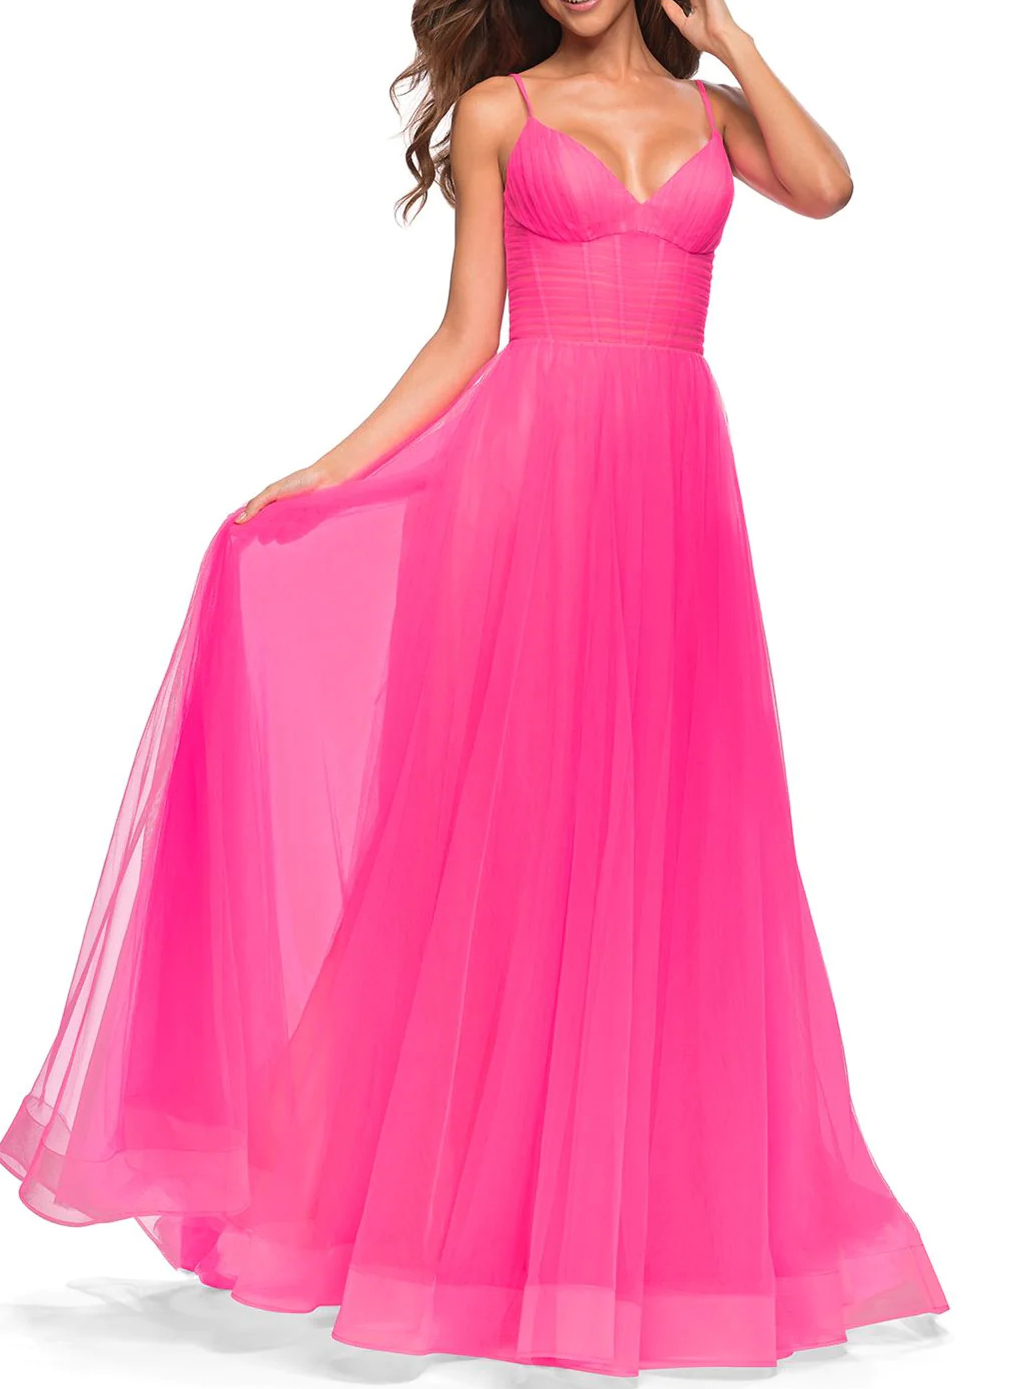 Hot Pink Princess Tulle Prom Dresses 